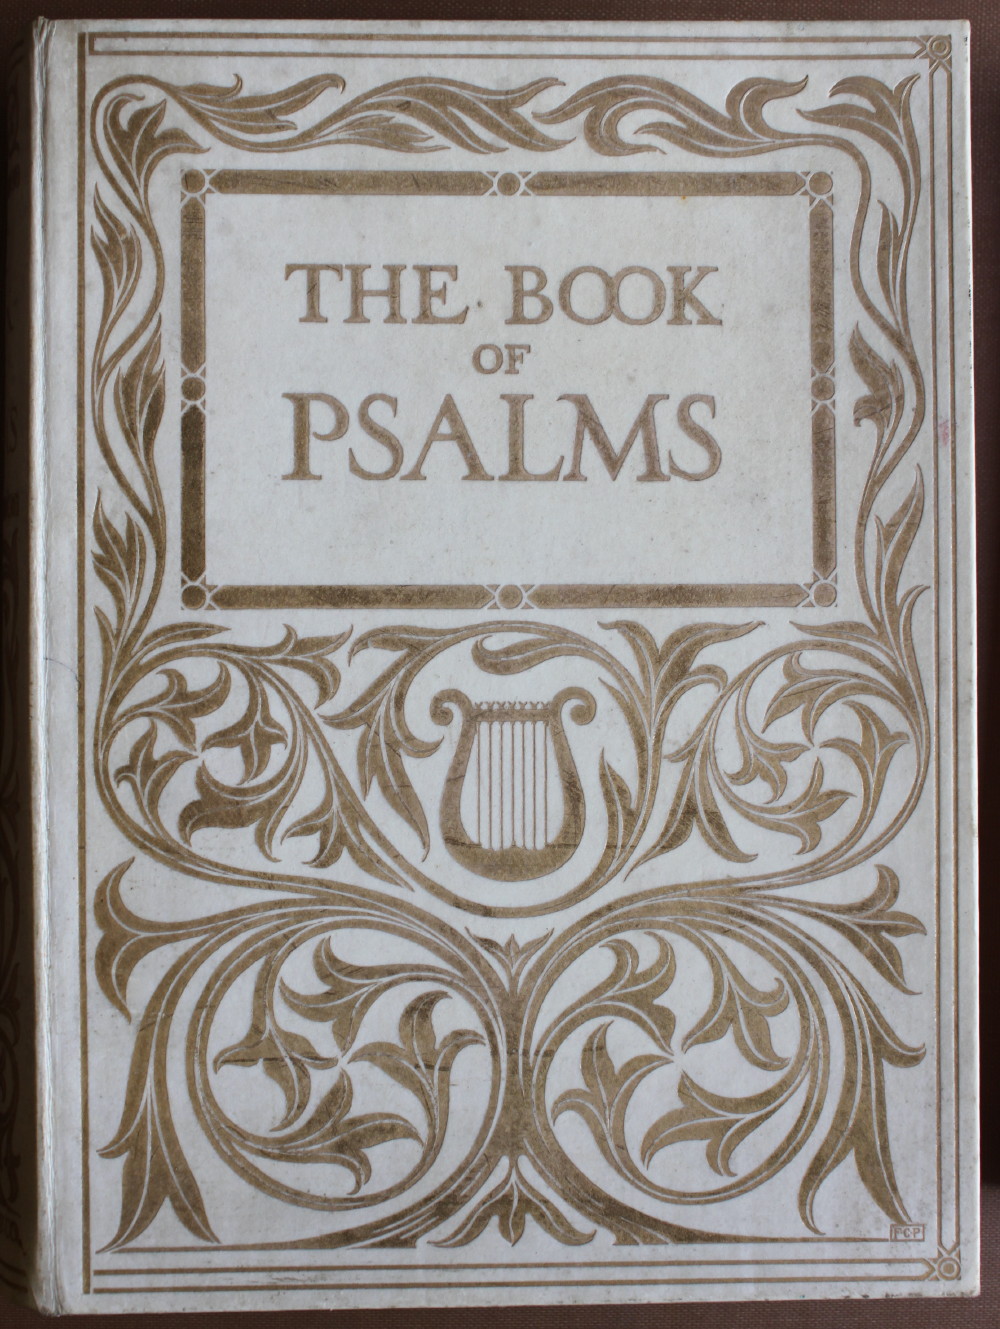 about book of psalms